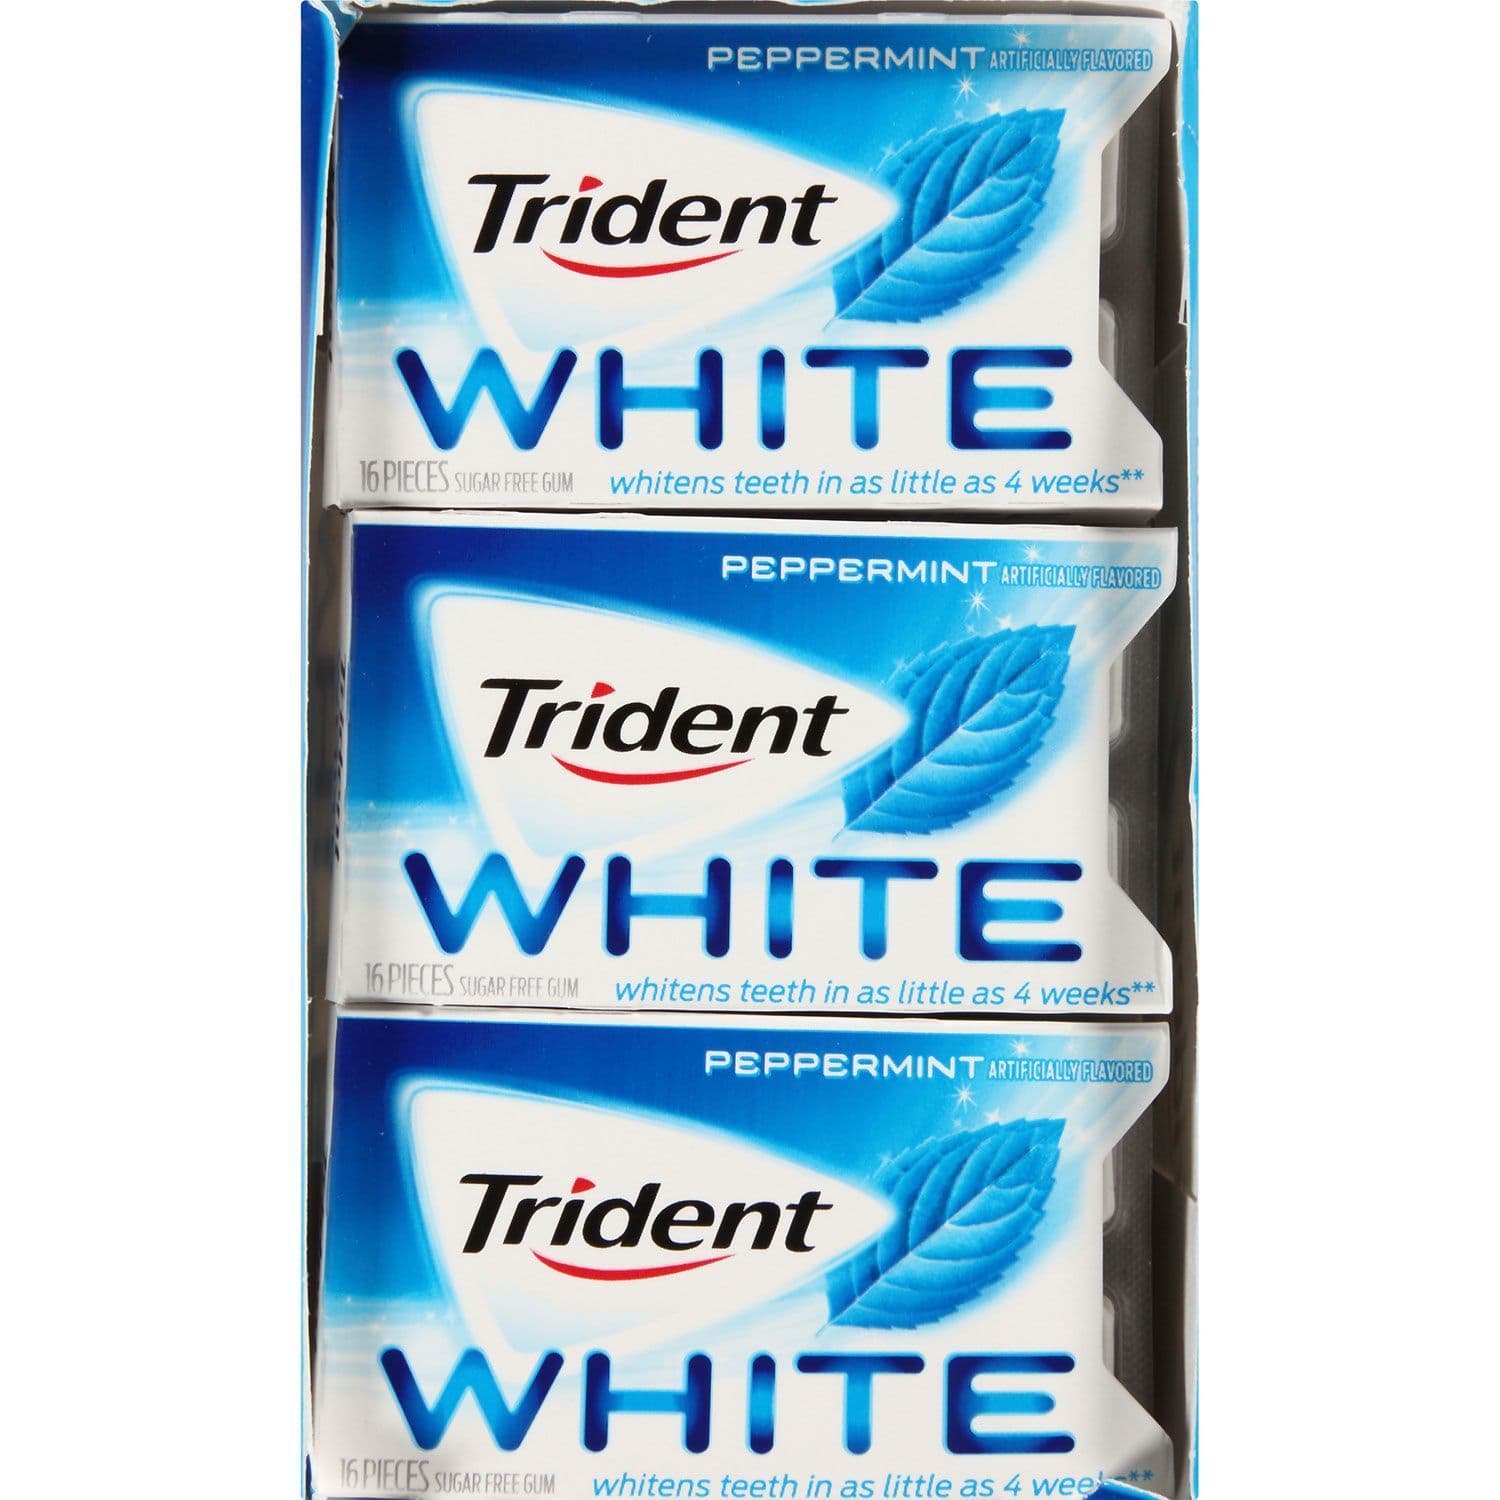 Trident white  peppermint sugger free gum 16 ct_12 Pks and other Trident gums for sale_wholesale